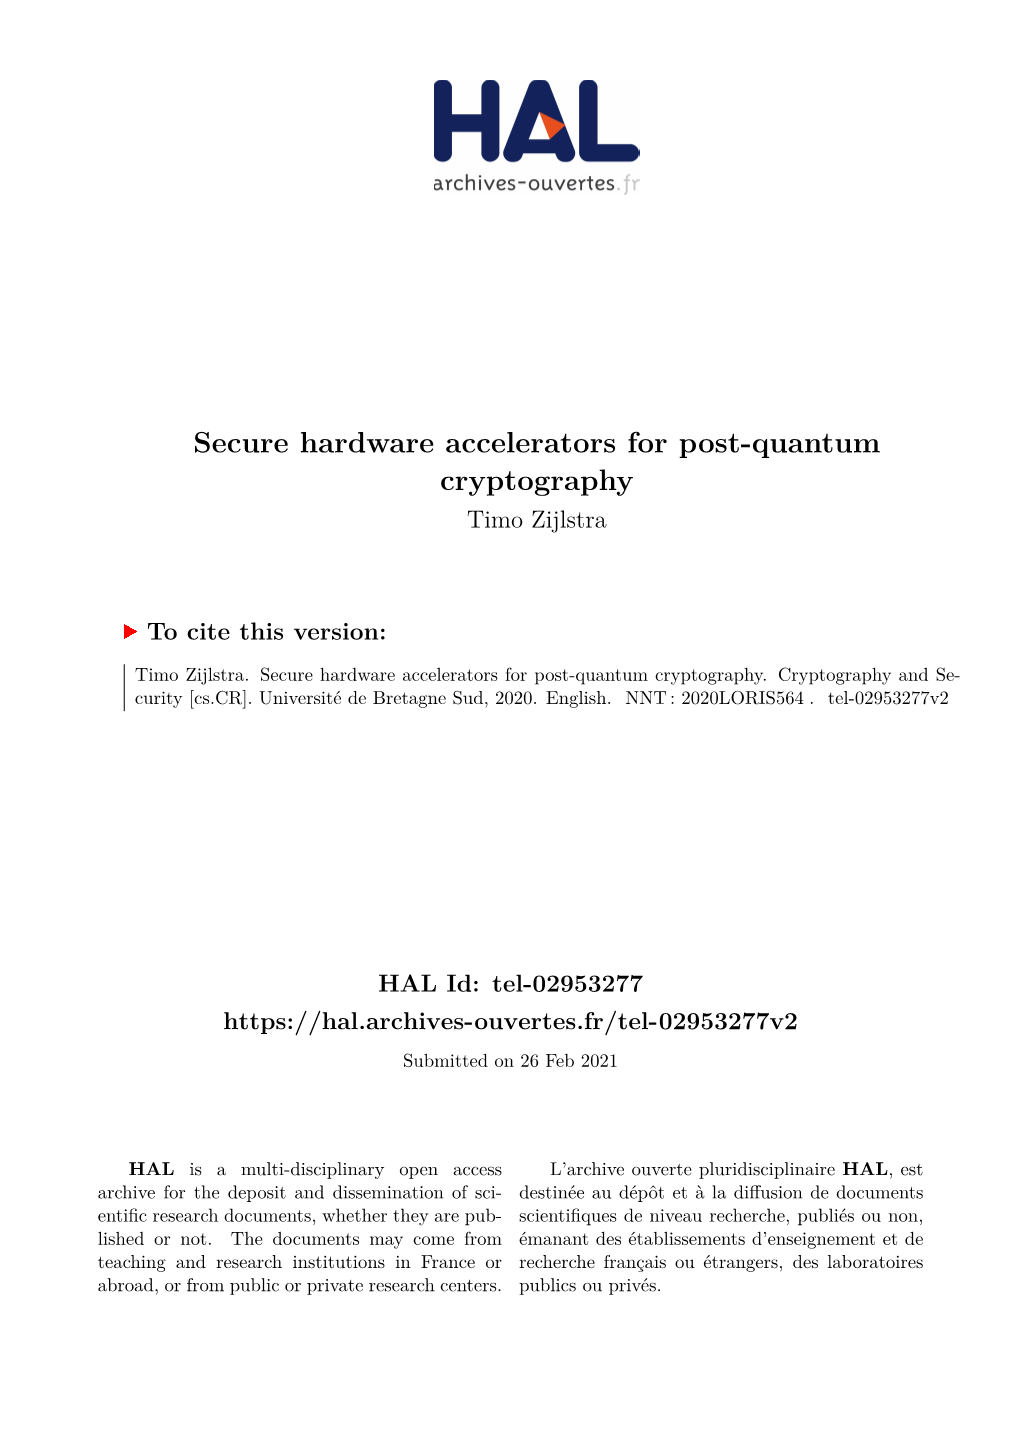 Secure Hardware Accelerators for Post-Quantum Cryptography Timo Zijlstra